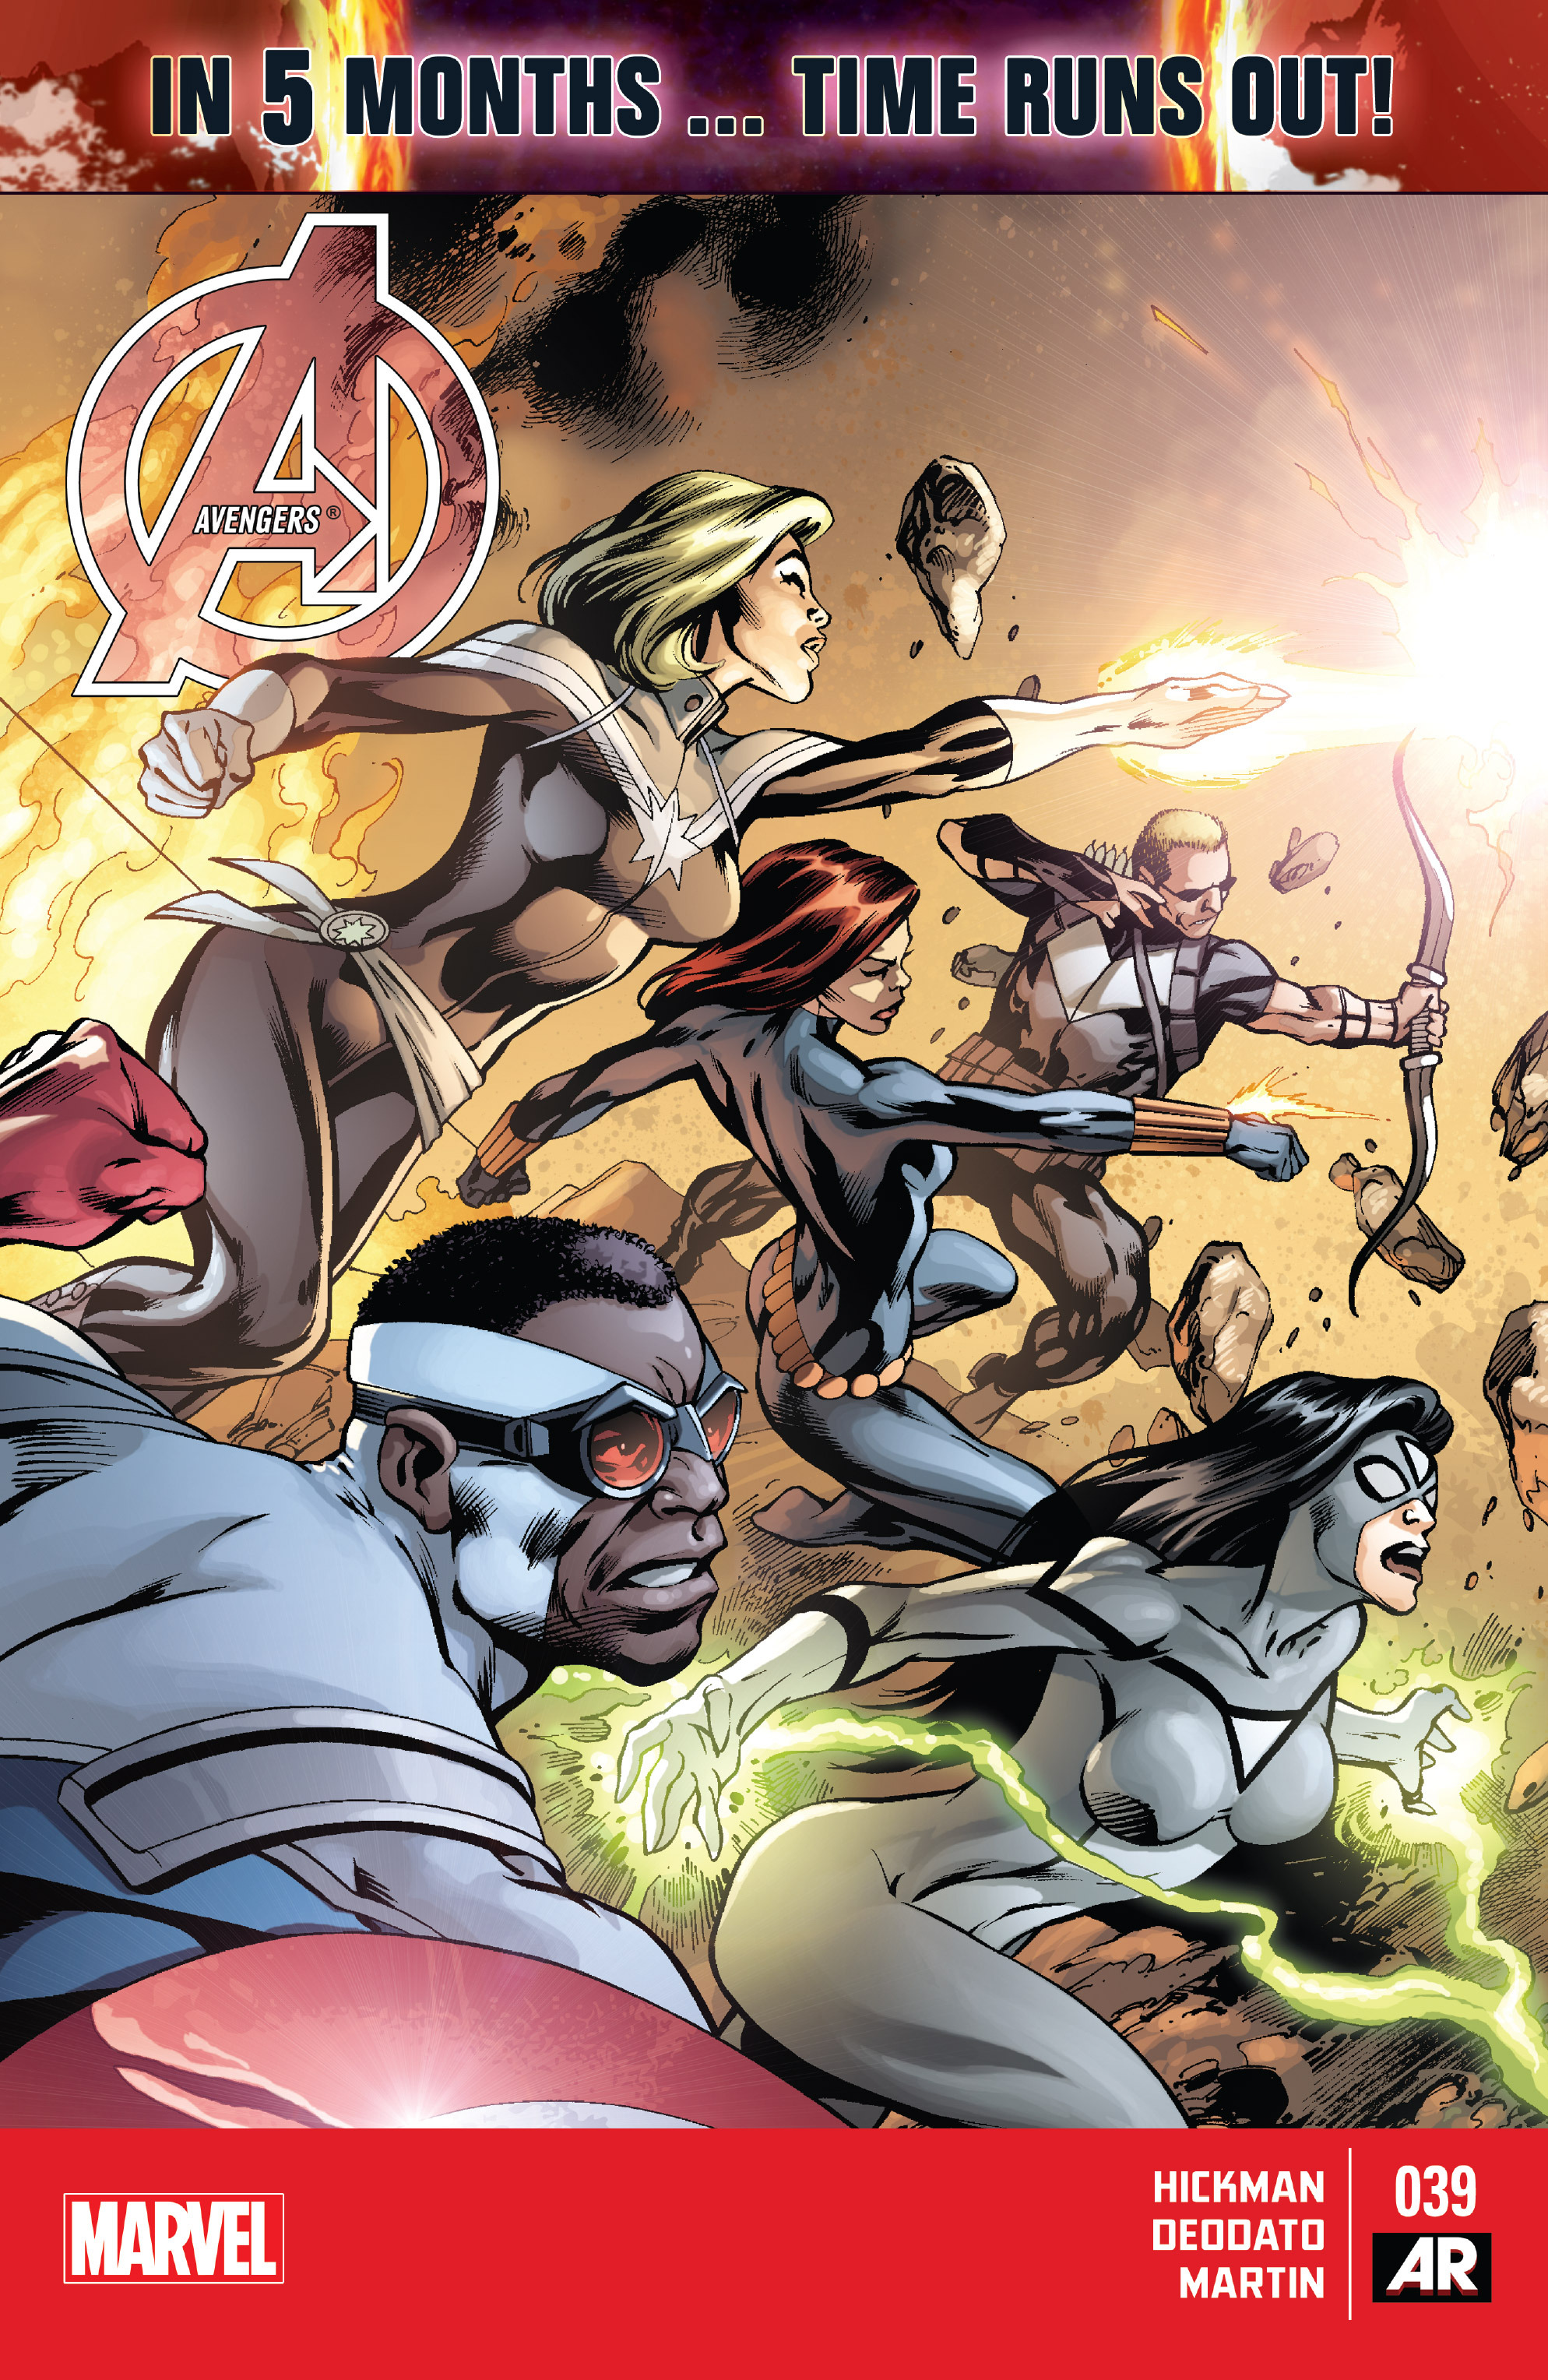 Read online Avengers: Time Runs Out comic -  Issue # TPB 2 - 76